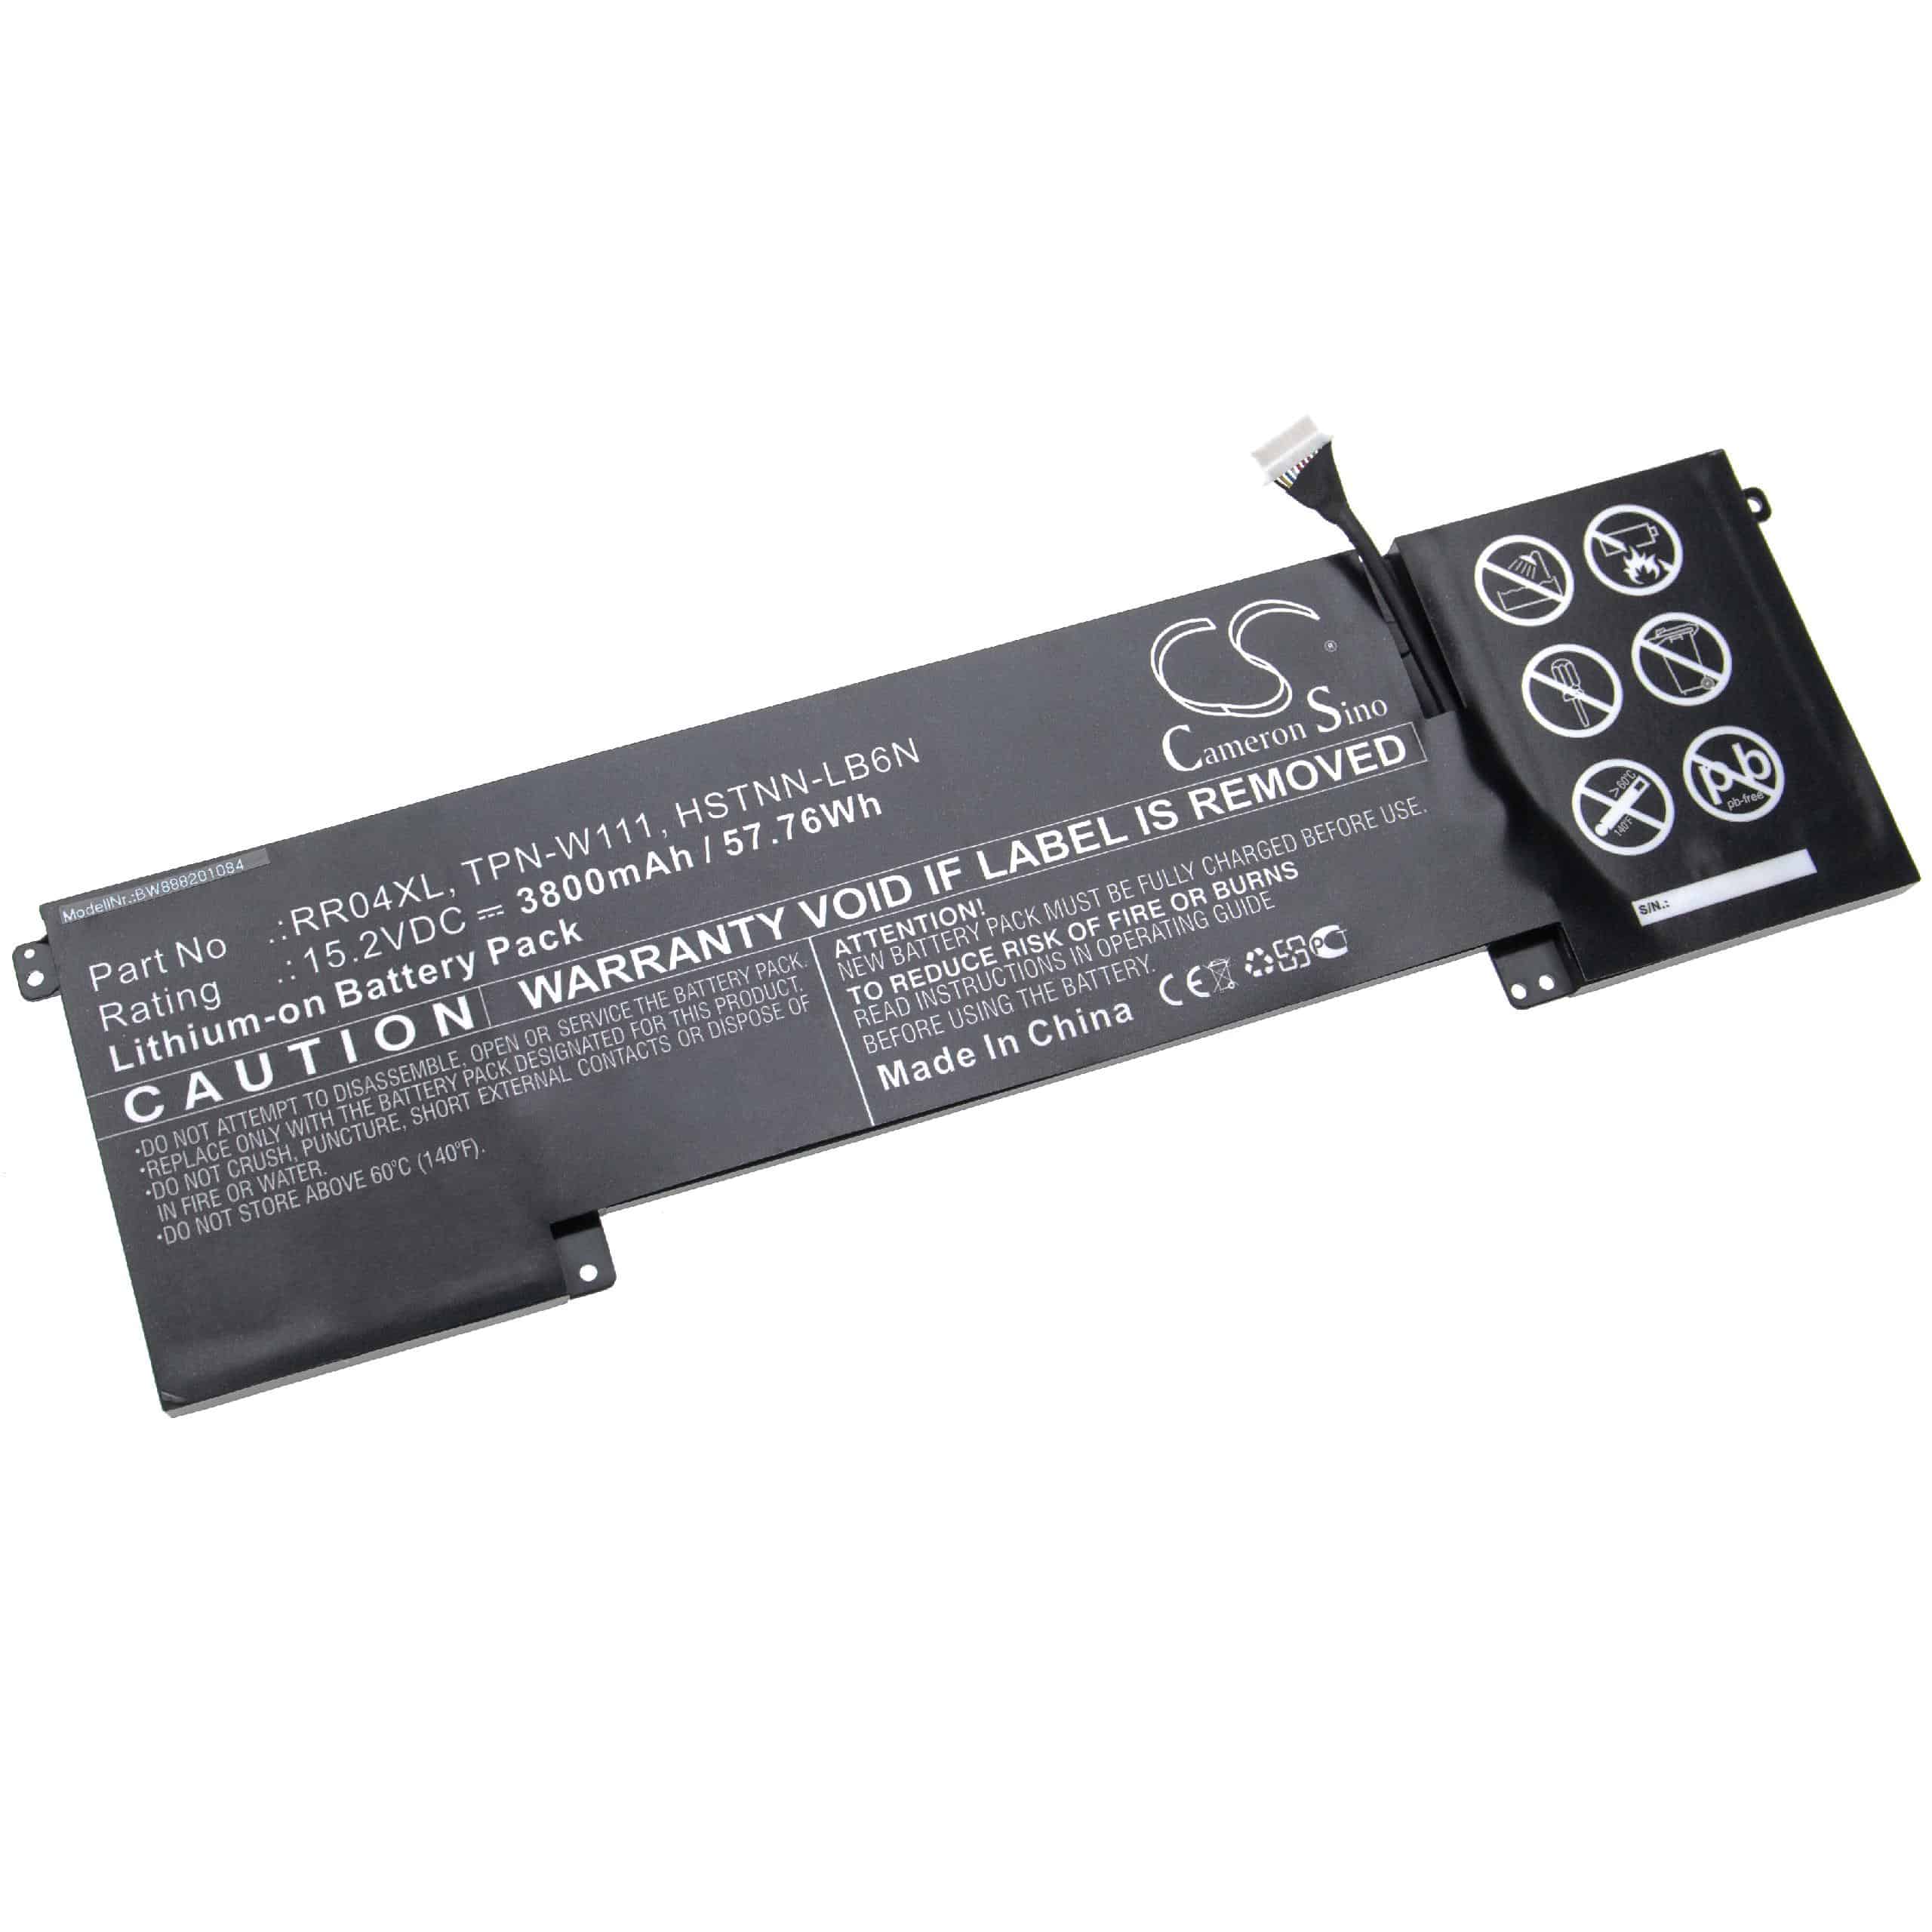 Notebook Battery Replacement for HP 778961-421, 778978-005, 778951-421 - 3800mAh 15.2V Li-Ion, black